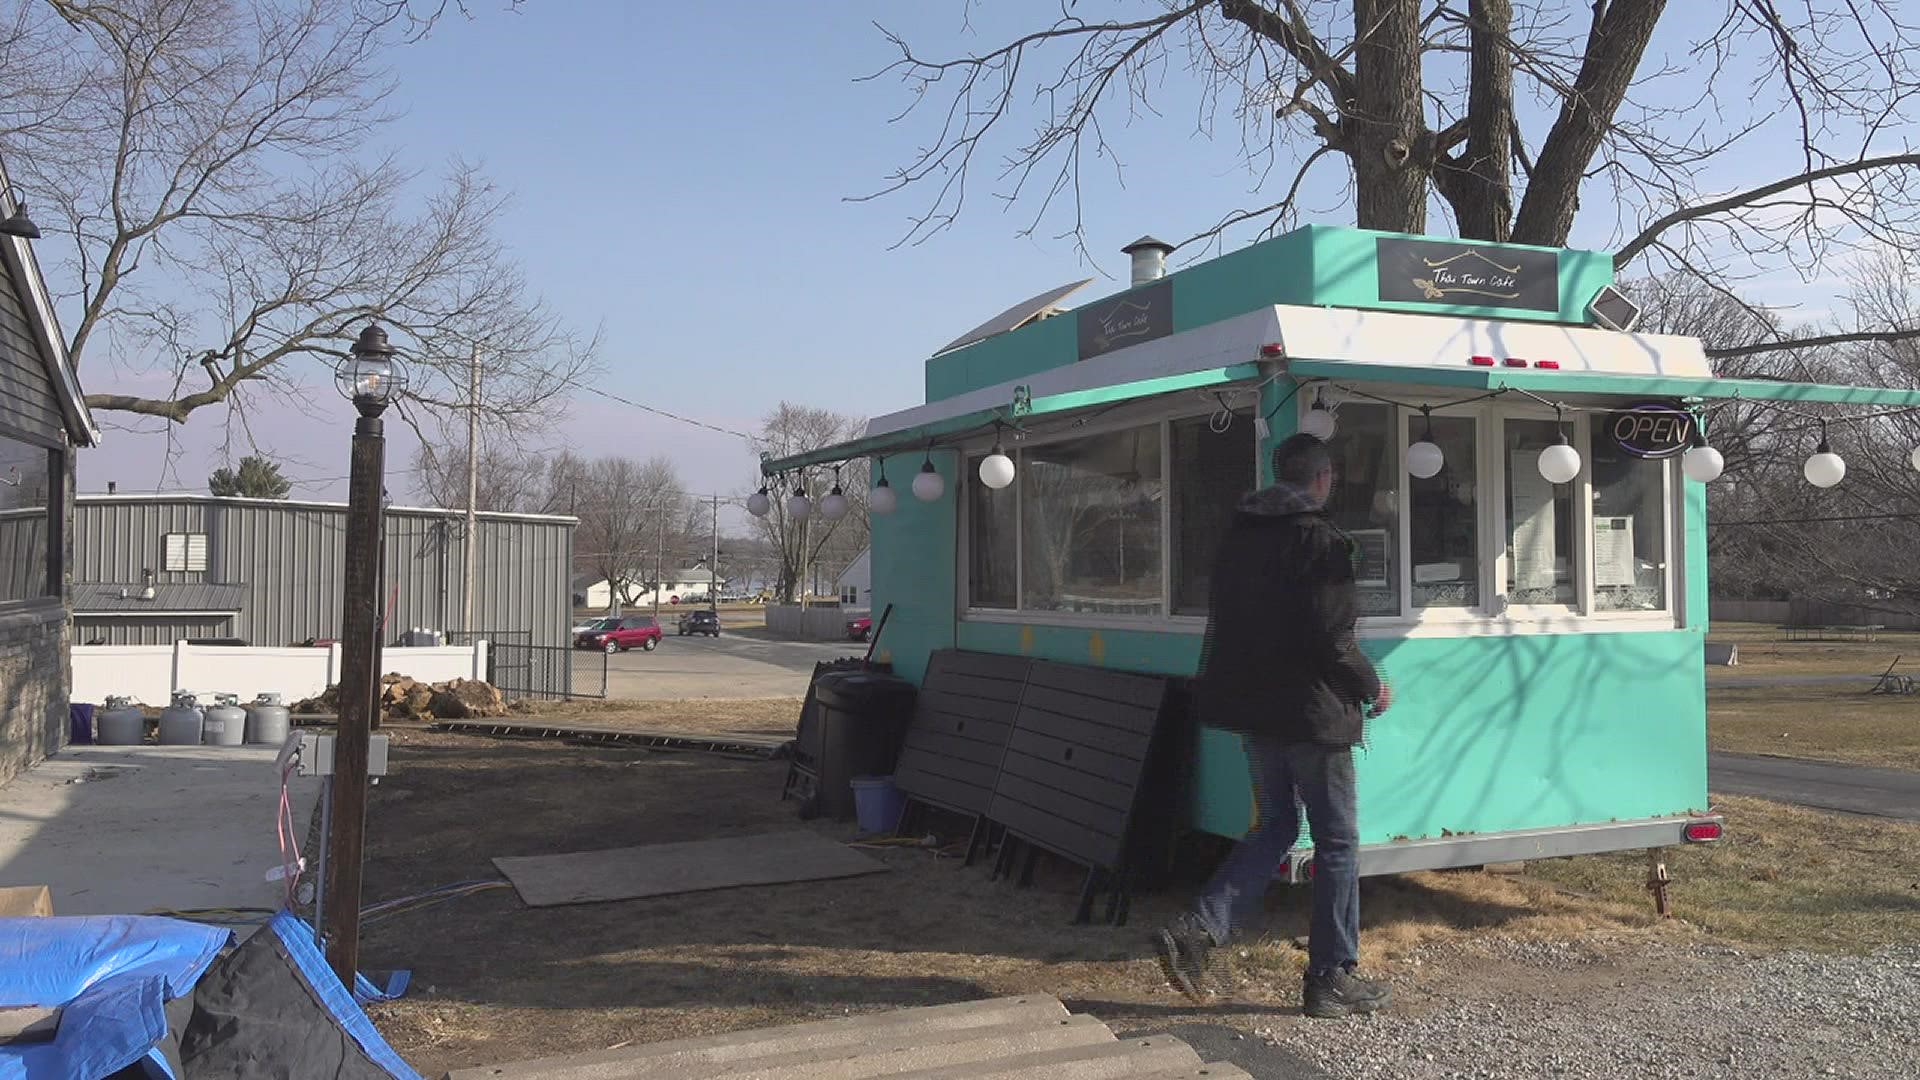 Thai Town Cafe Owner, Greg Kerner says price of gas strayed him away from traveling in his food truck.